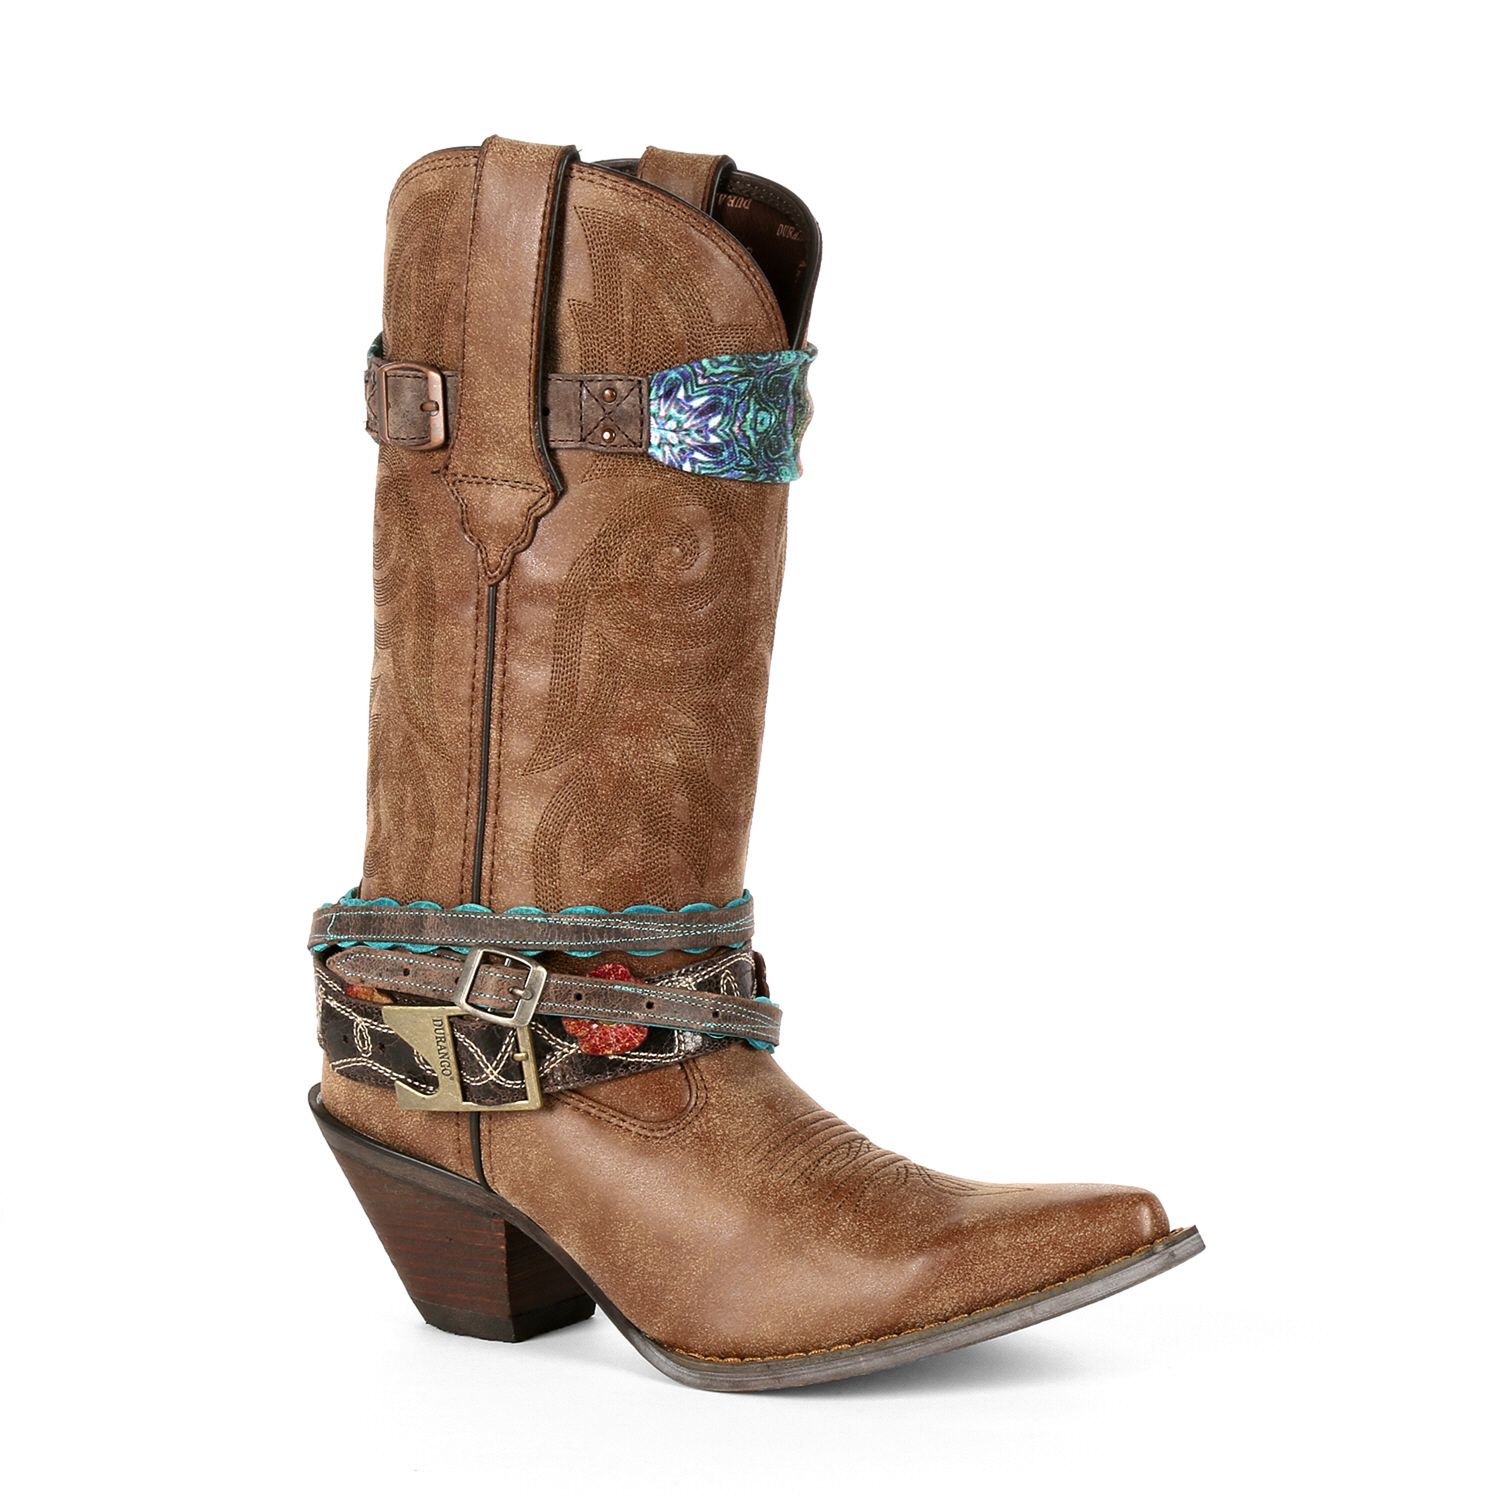 Image for Durango Crush Accessorized Women's Cowboy Boots at Kohl's.